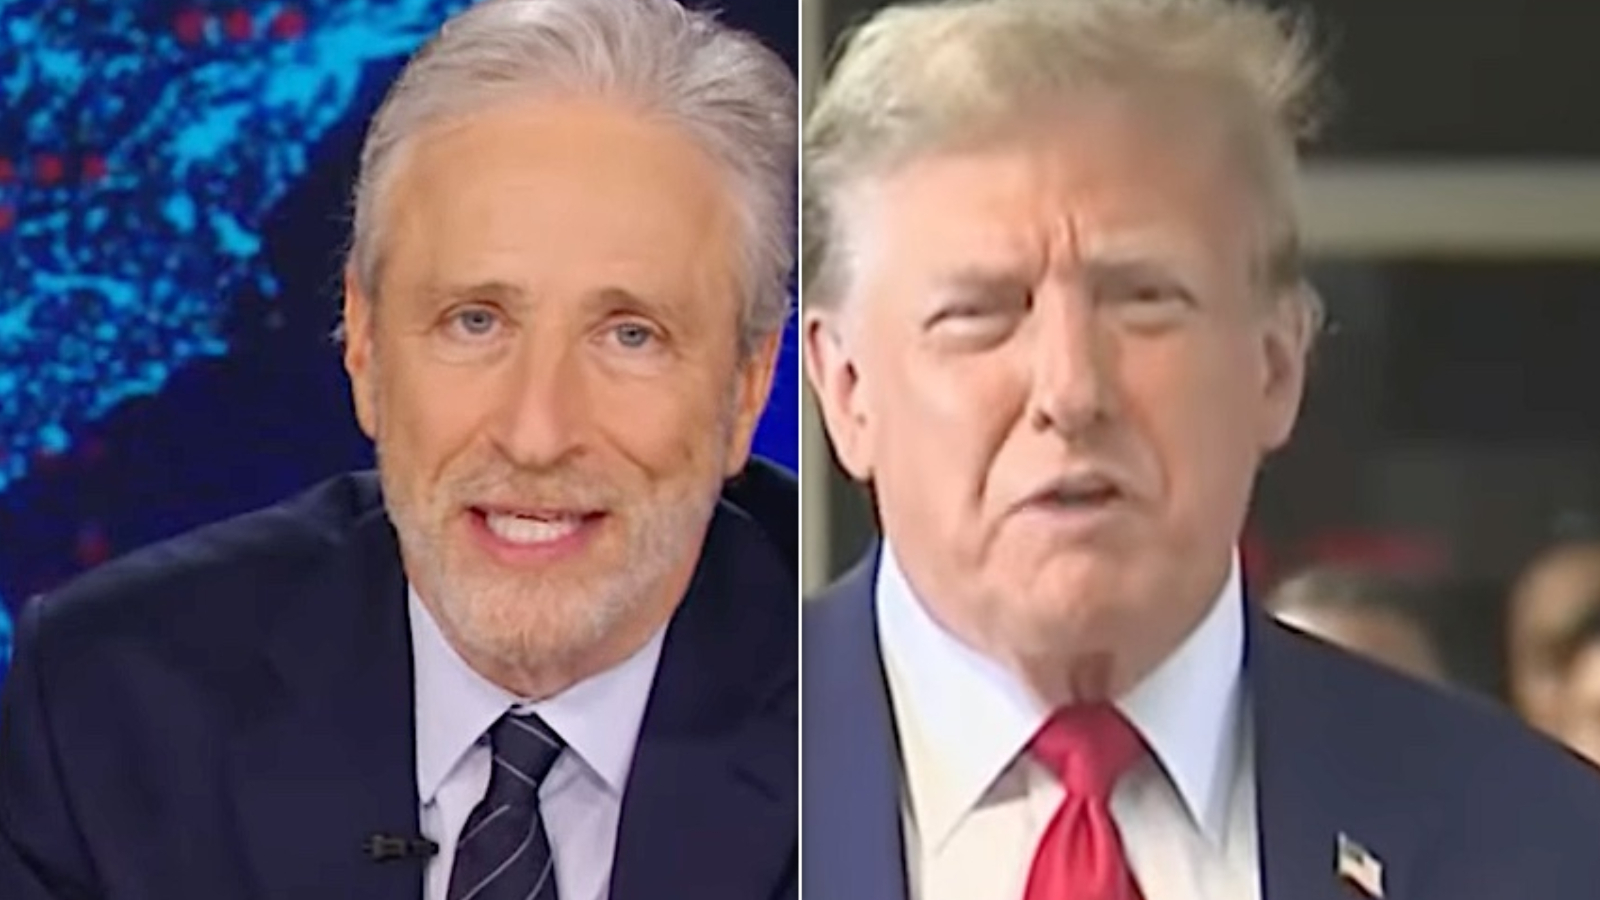 jon stewart gives trump rude wake-up call for seeming to fall asleep in court